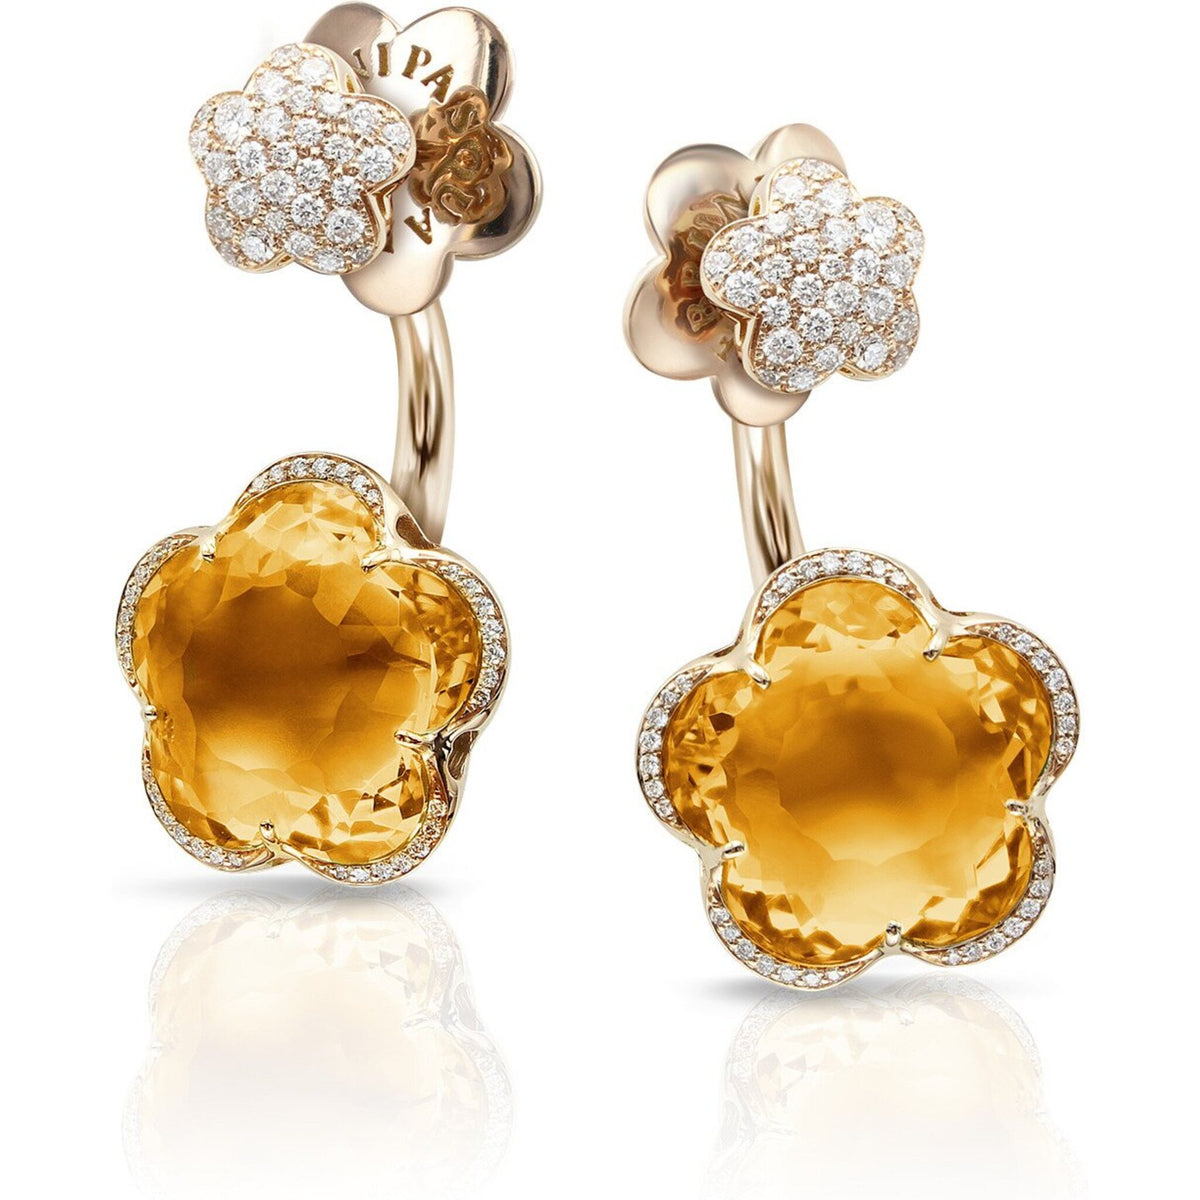 Pasquale Bruni - Bon Ton Divine Piercing Earrings in 18k Rose Gold with Citrine and Diamonds